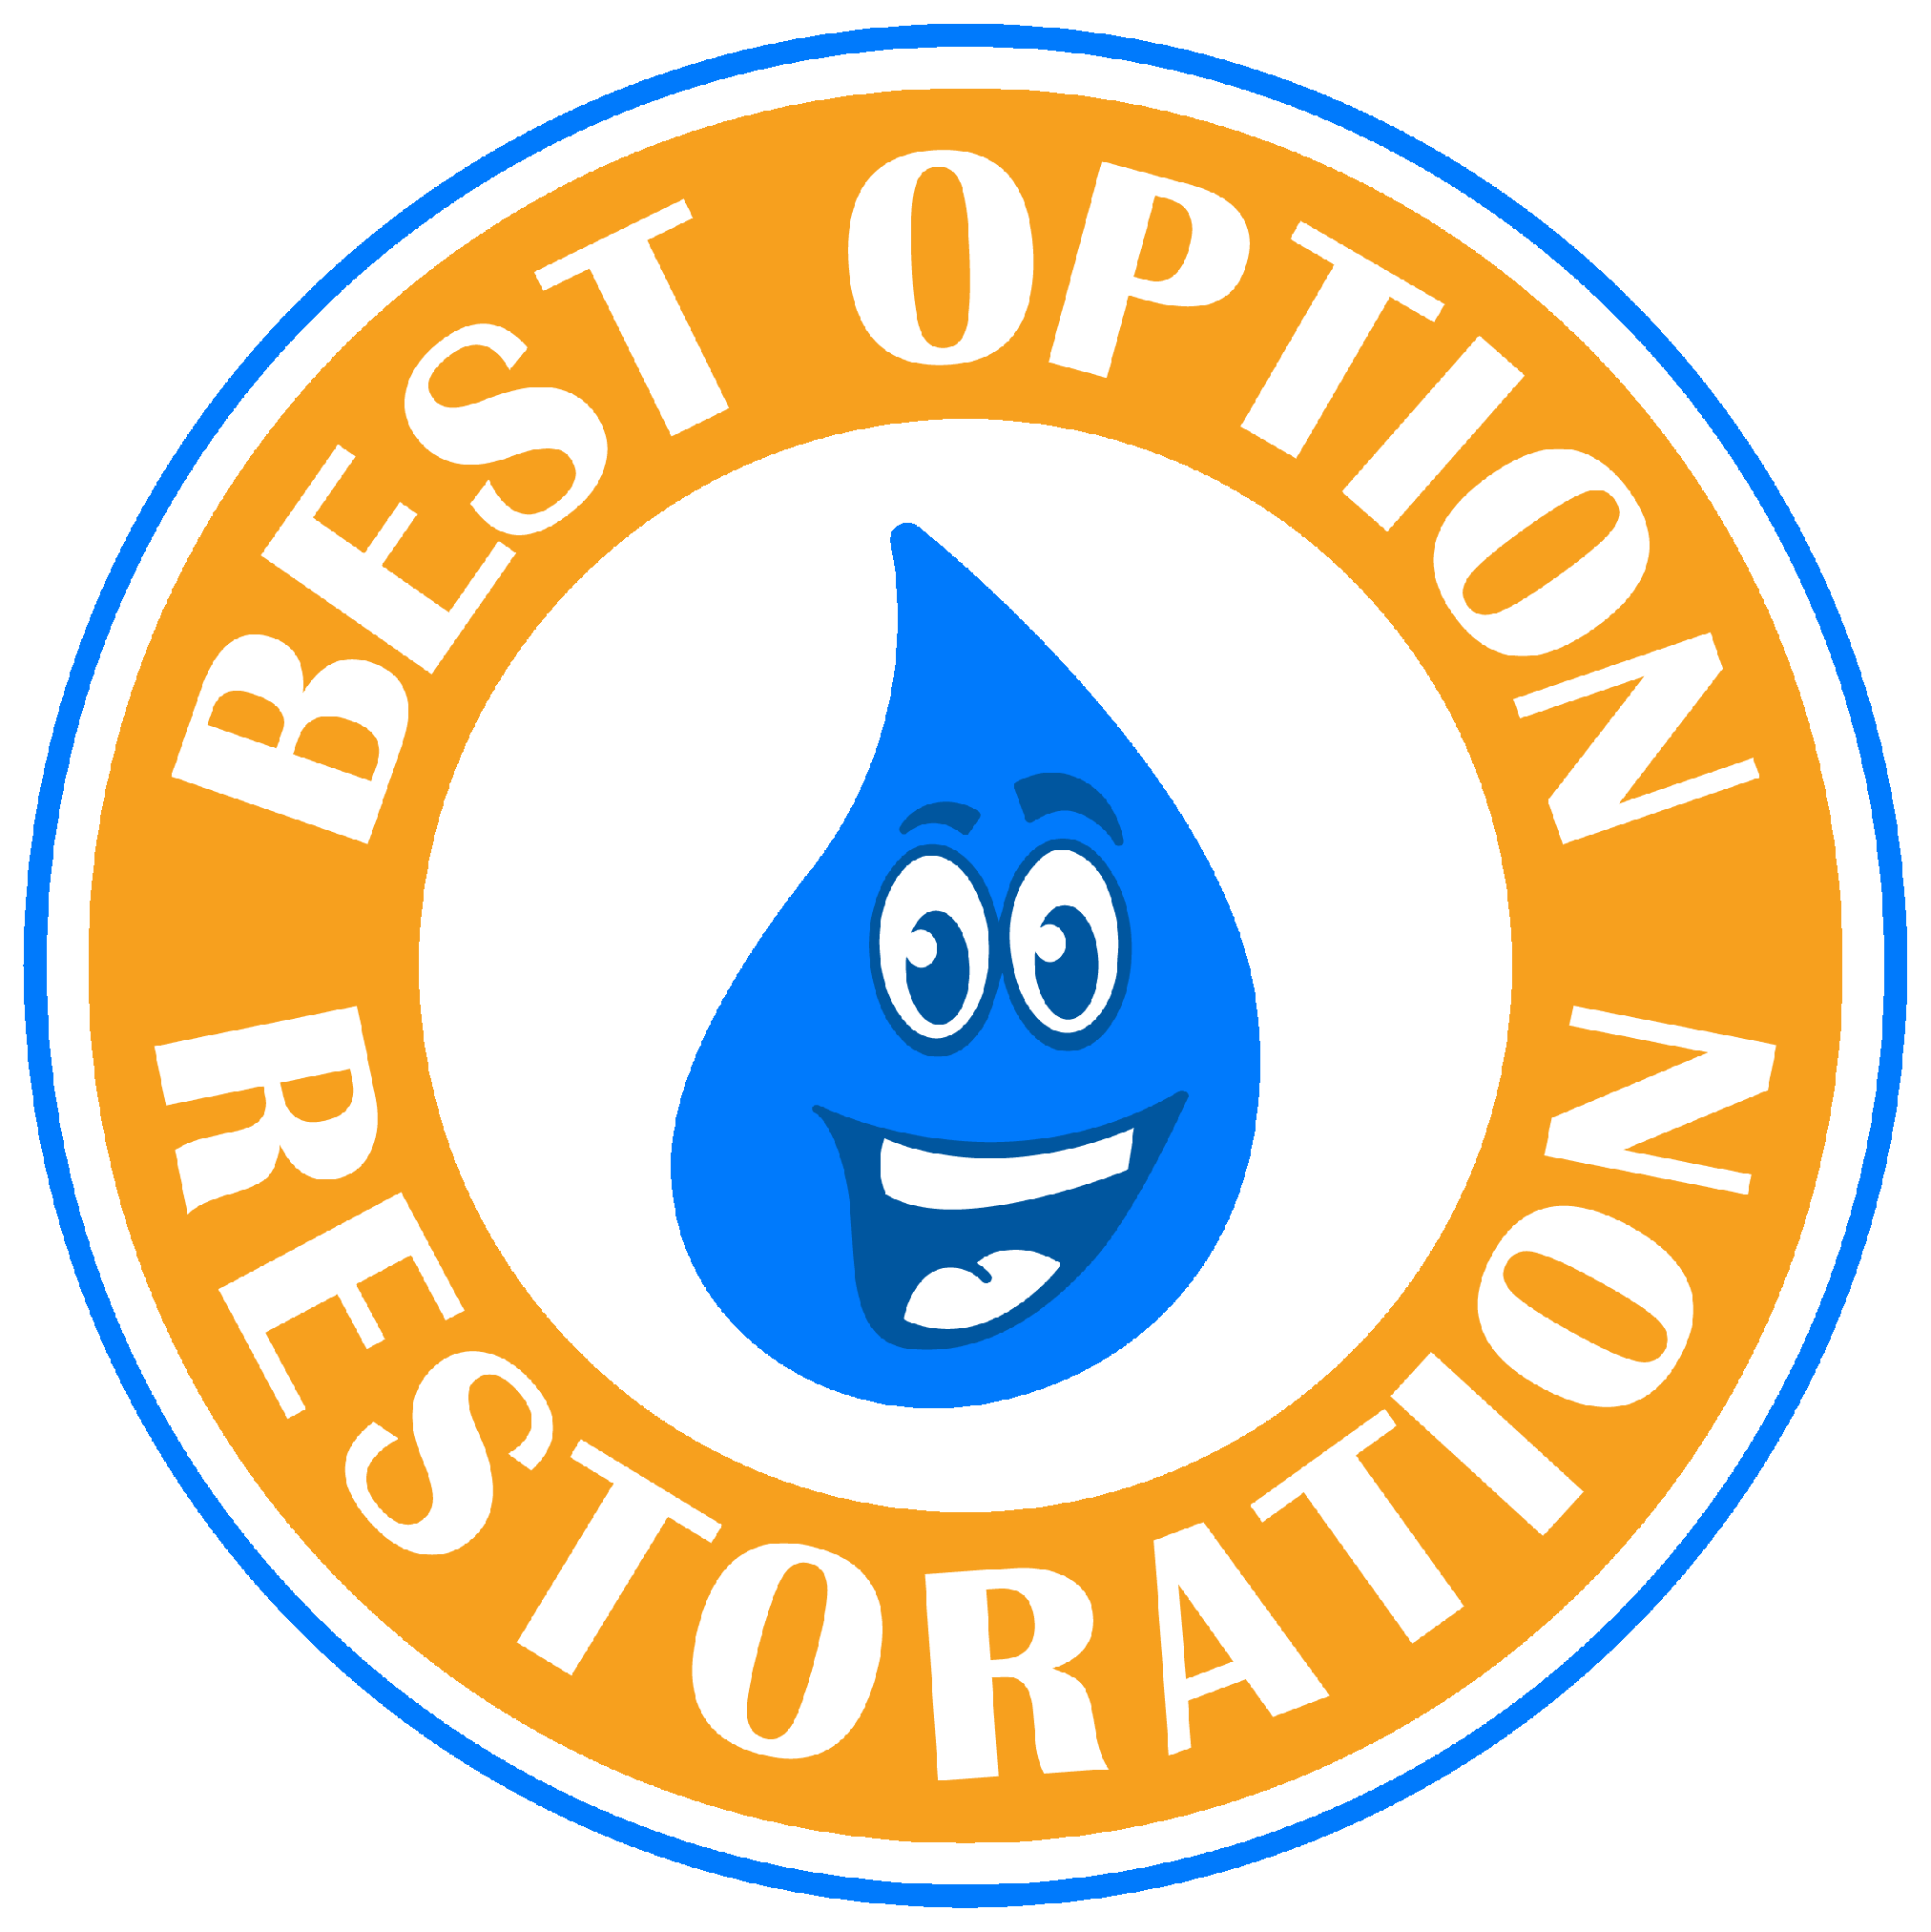 Disaster Restoration Company, Water Damage Repair Service in NW Minneapolis, MN